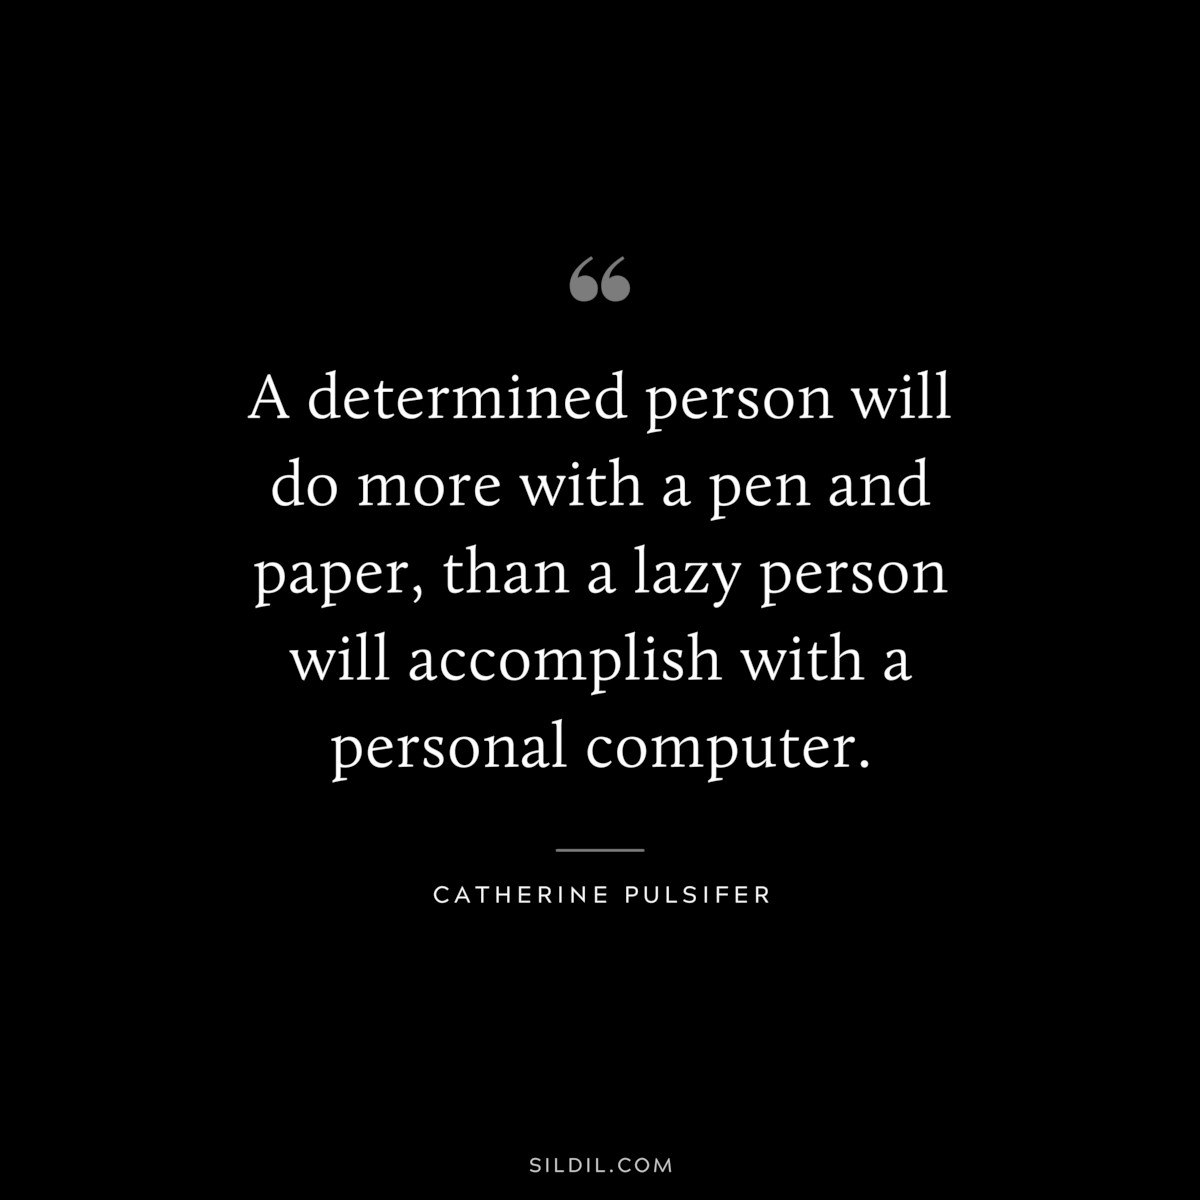 A determined person will do more with a pen and paper, than a lazy person will accomplish with a personal computer. ― Catherine Pulsifer